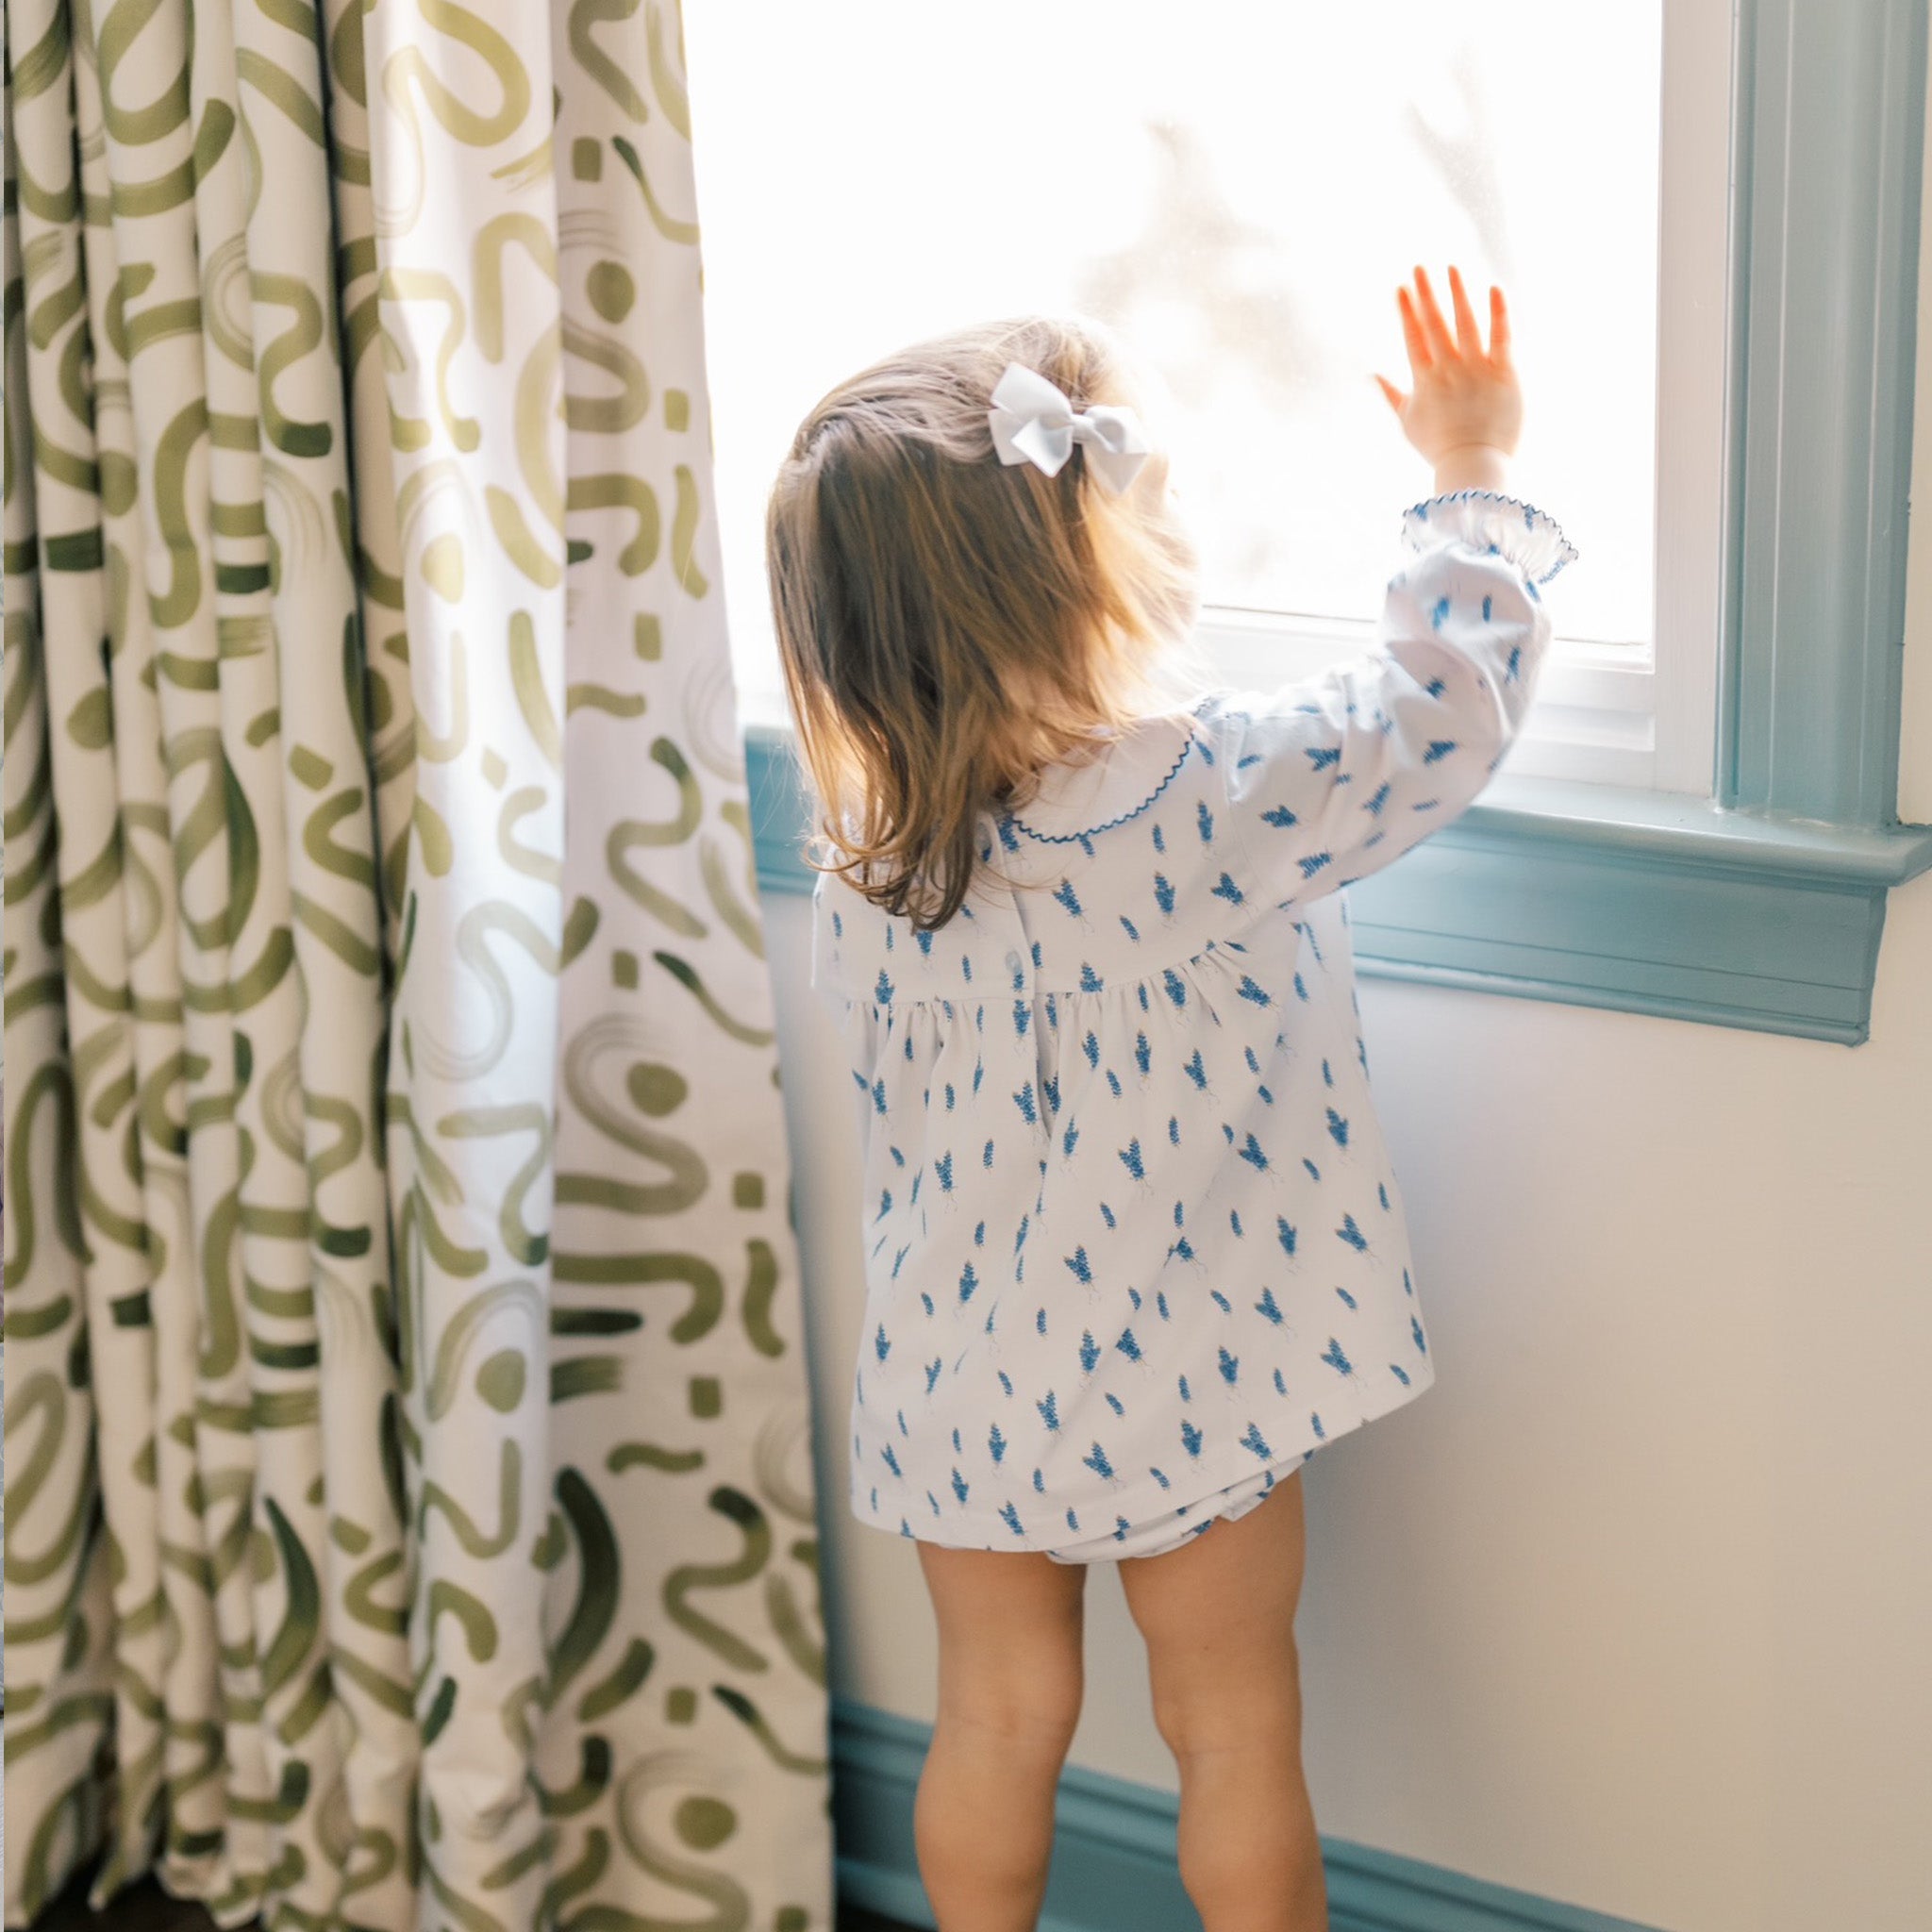 Close-up of Blonde Baby with white and blue dress touching the window next to Moss Green Printed Curtain